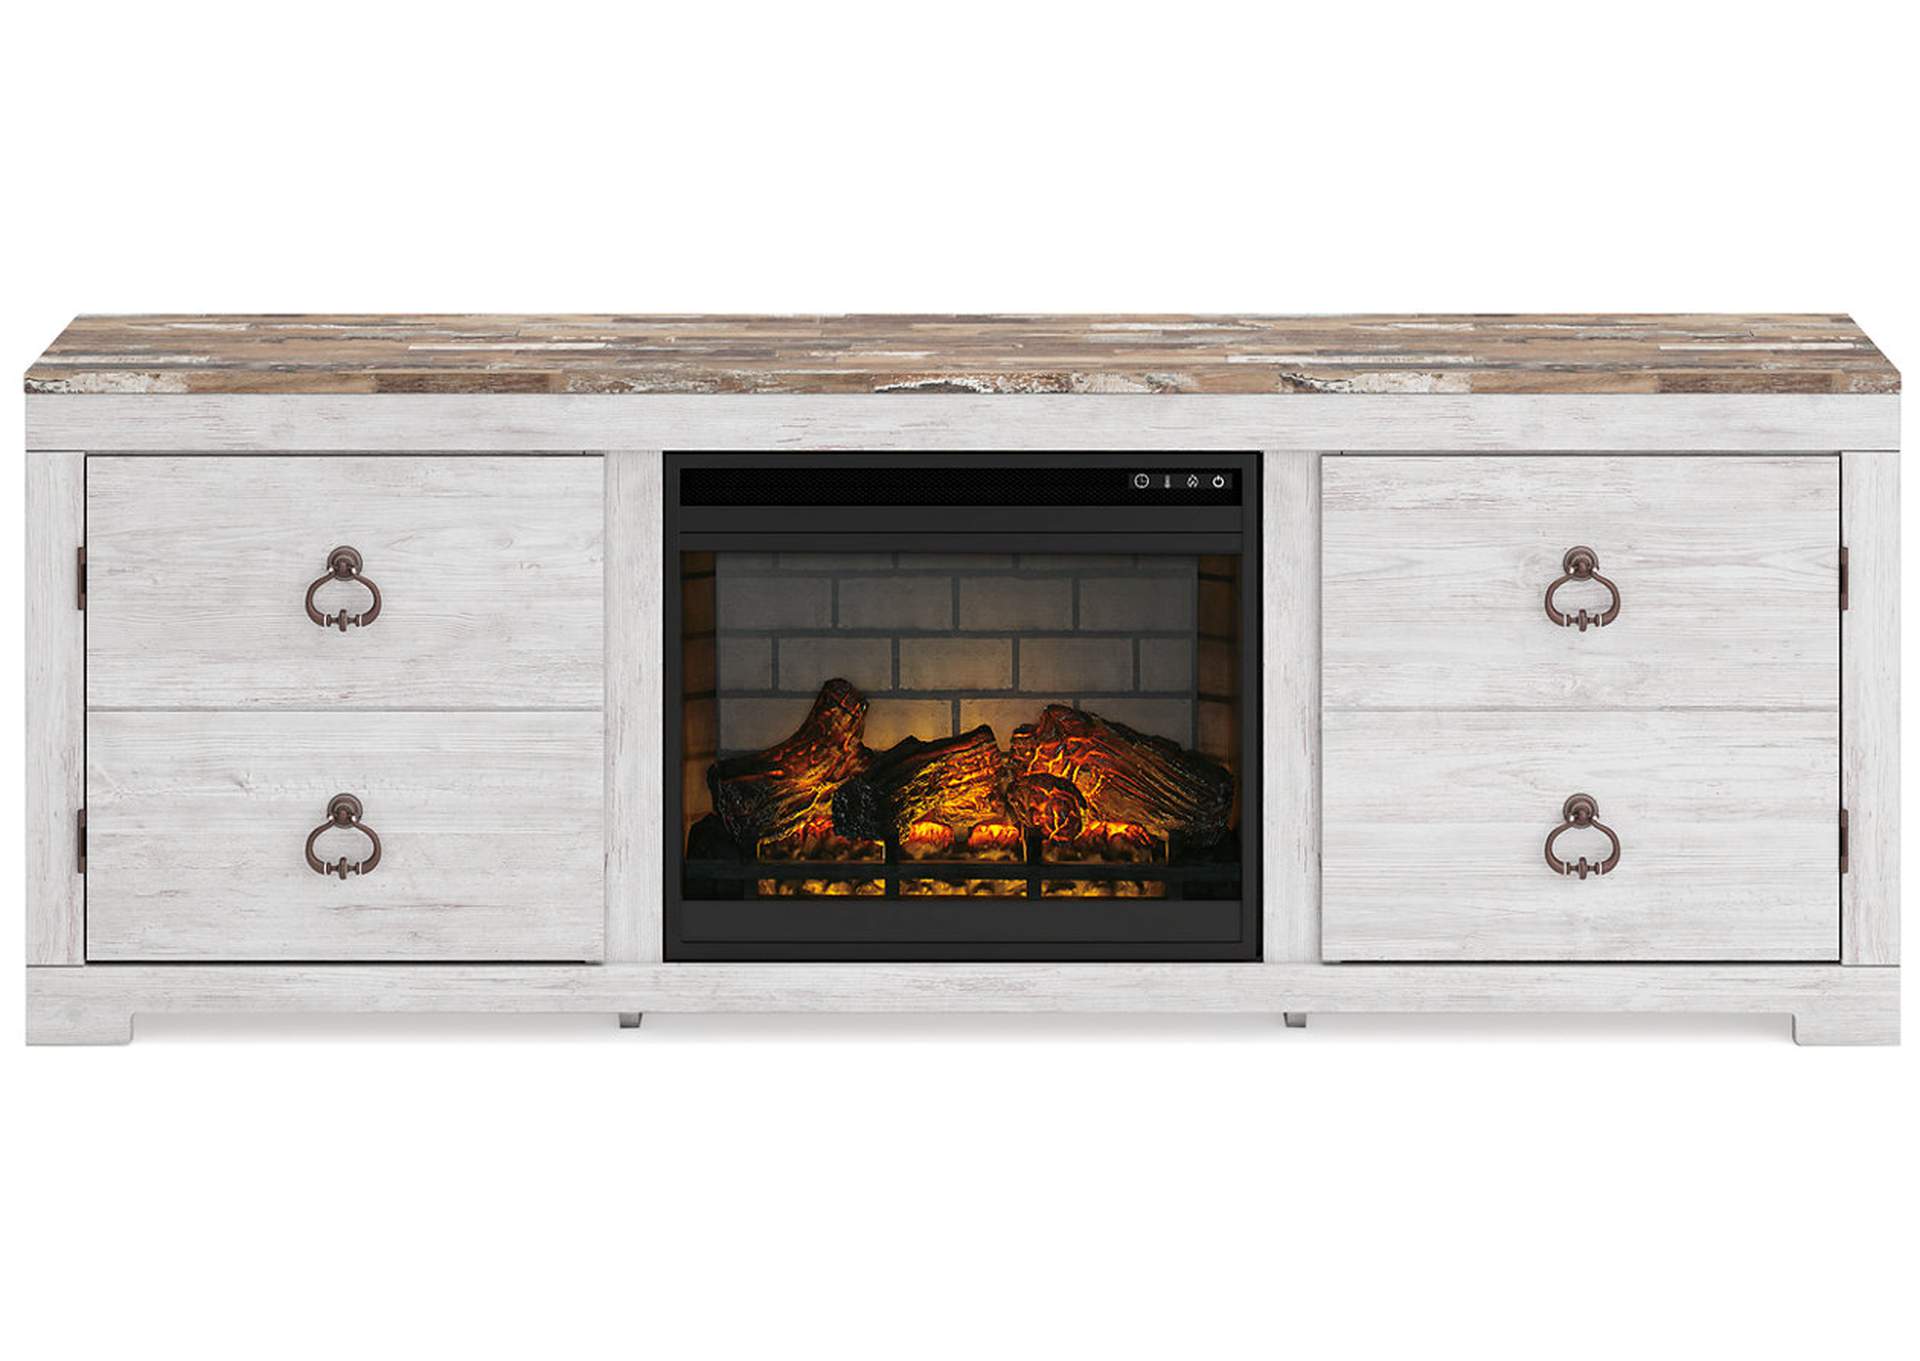 Willowton 72" TV Stand with Electric Fireplace,Signature Design By Ashley